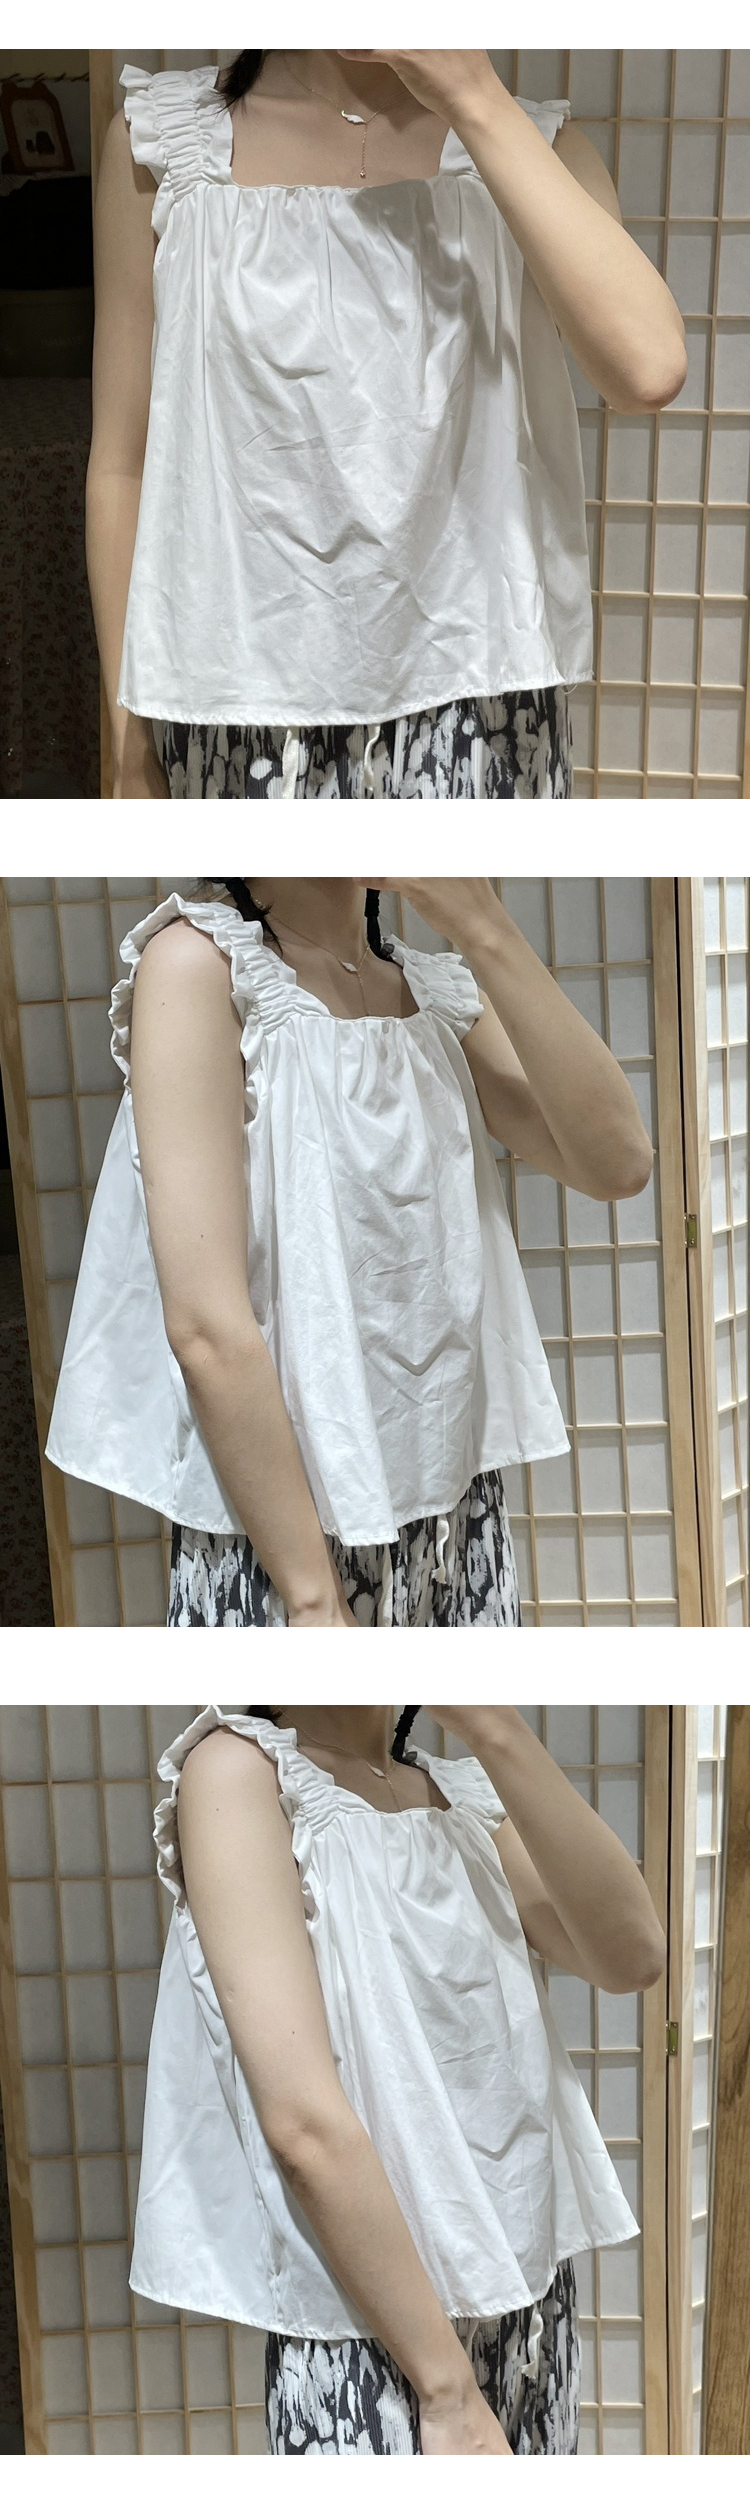 KOIN COLLECTION Square Frill Banding Sleeveless Blouse White Color & Free Size 5